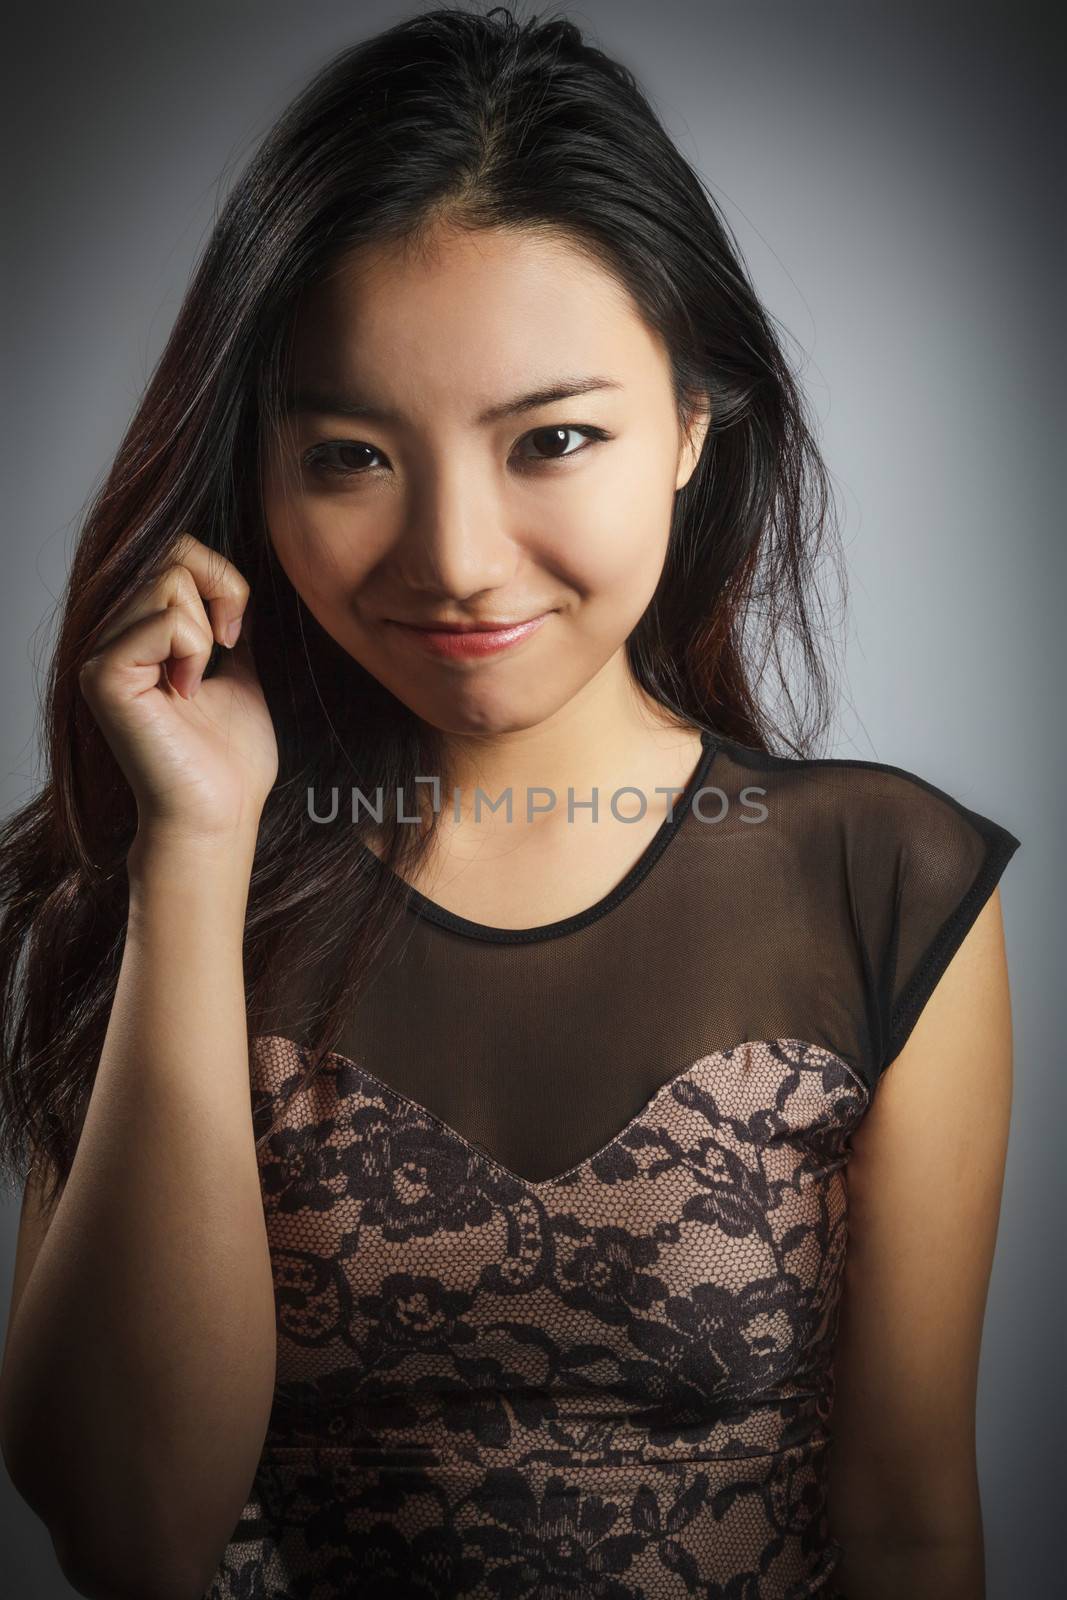 Attractive asian girl 20 years old shot in studio by shipfactory